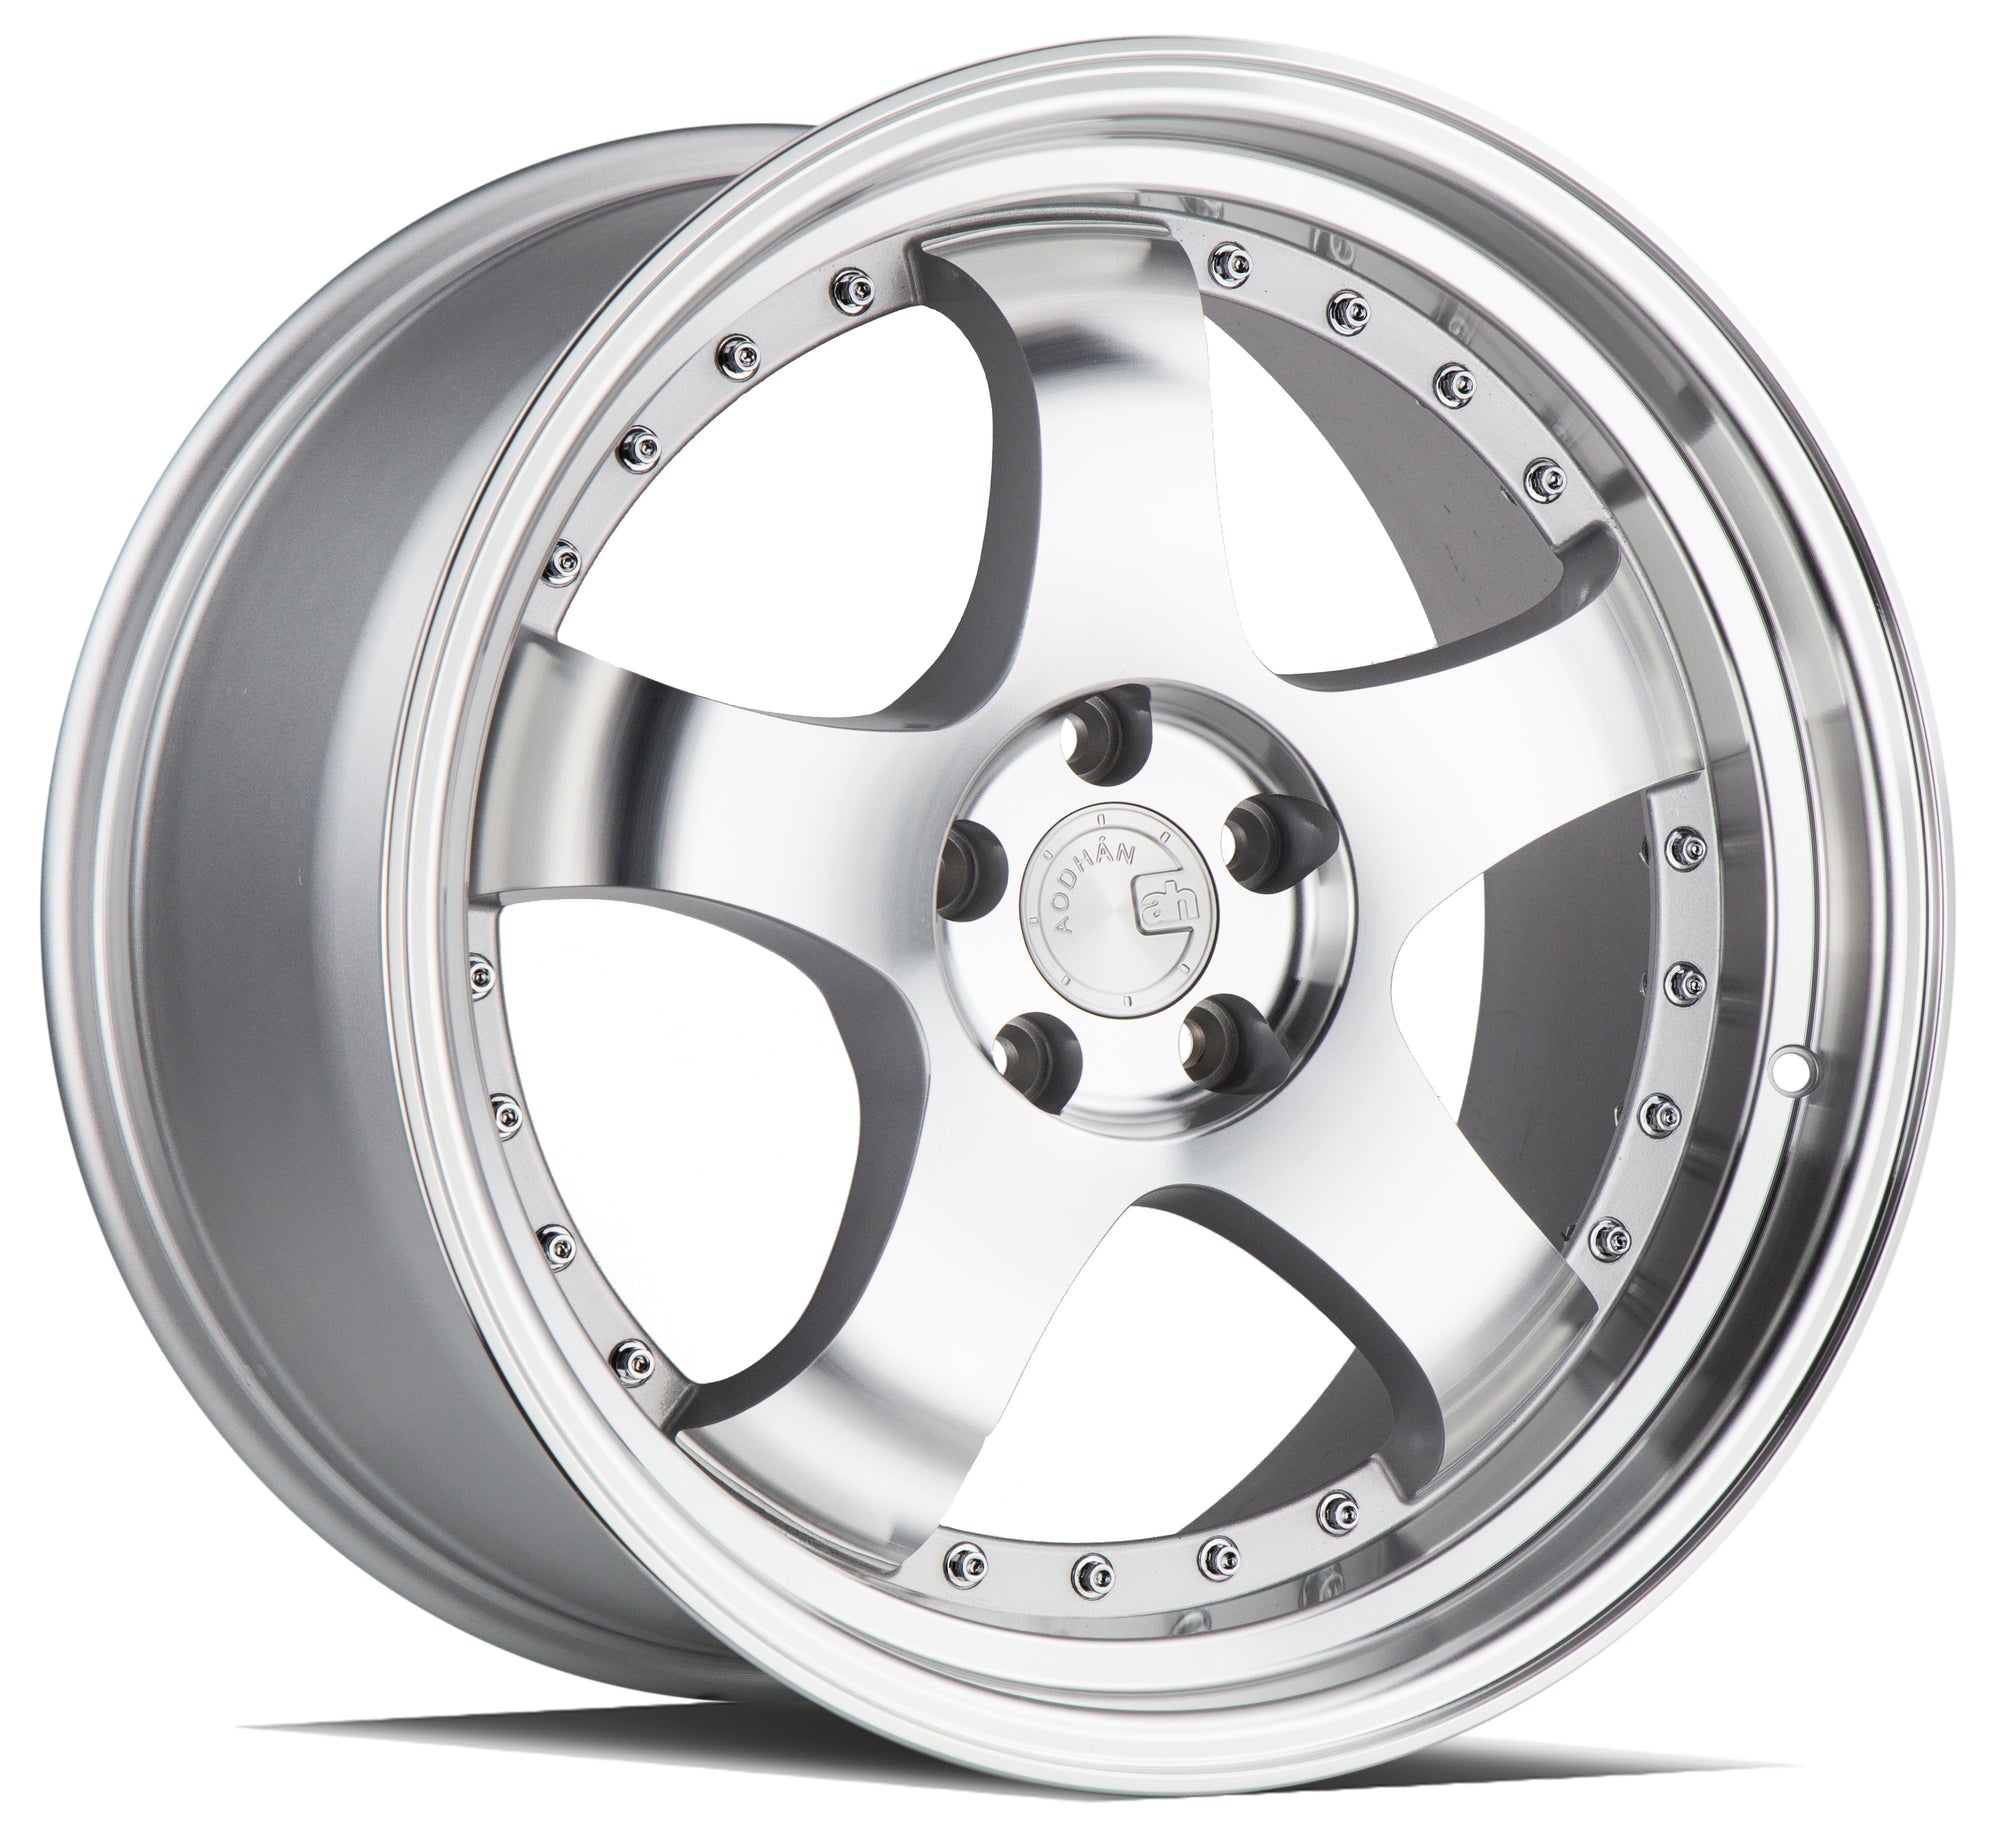 Aodhan AH03 18x9.5 5x114.3 +30 Silver Machined Face And Lip